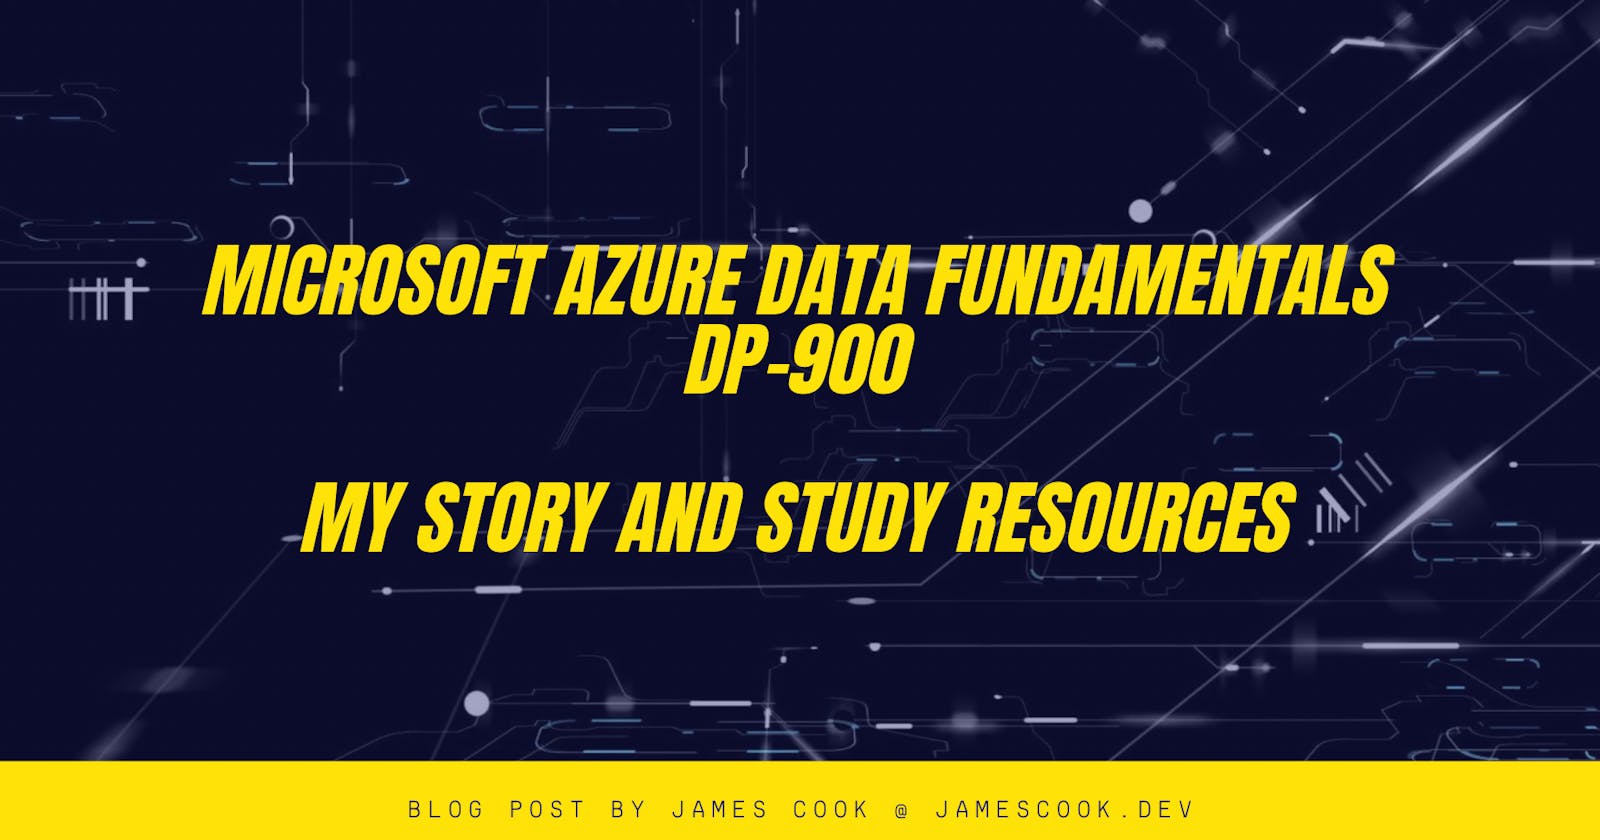 Azure Data Fundamentals (DP-900) - My Story and Study Resources